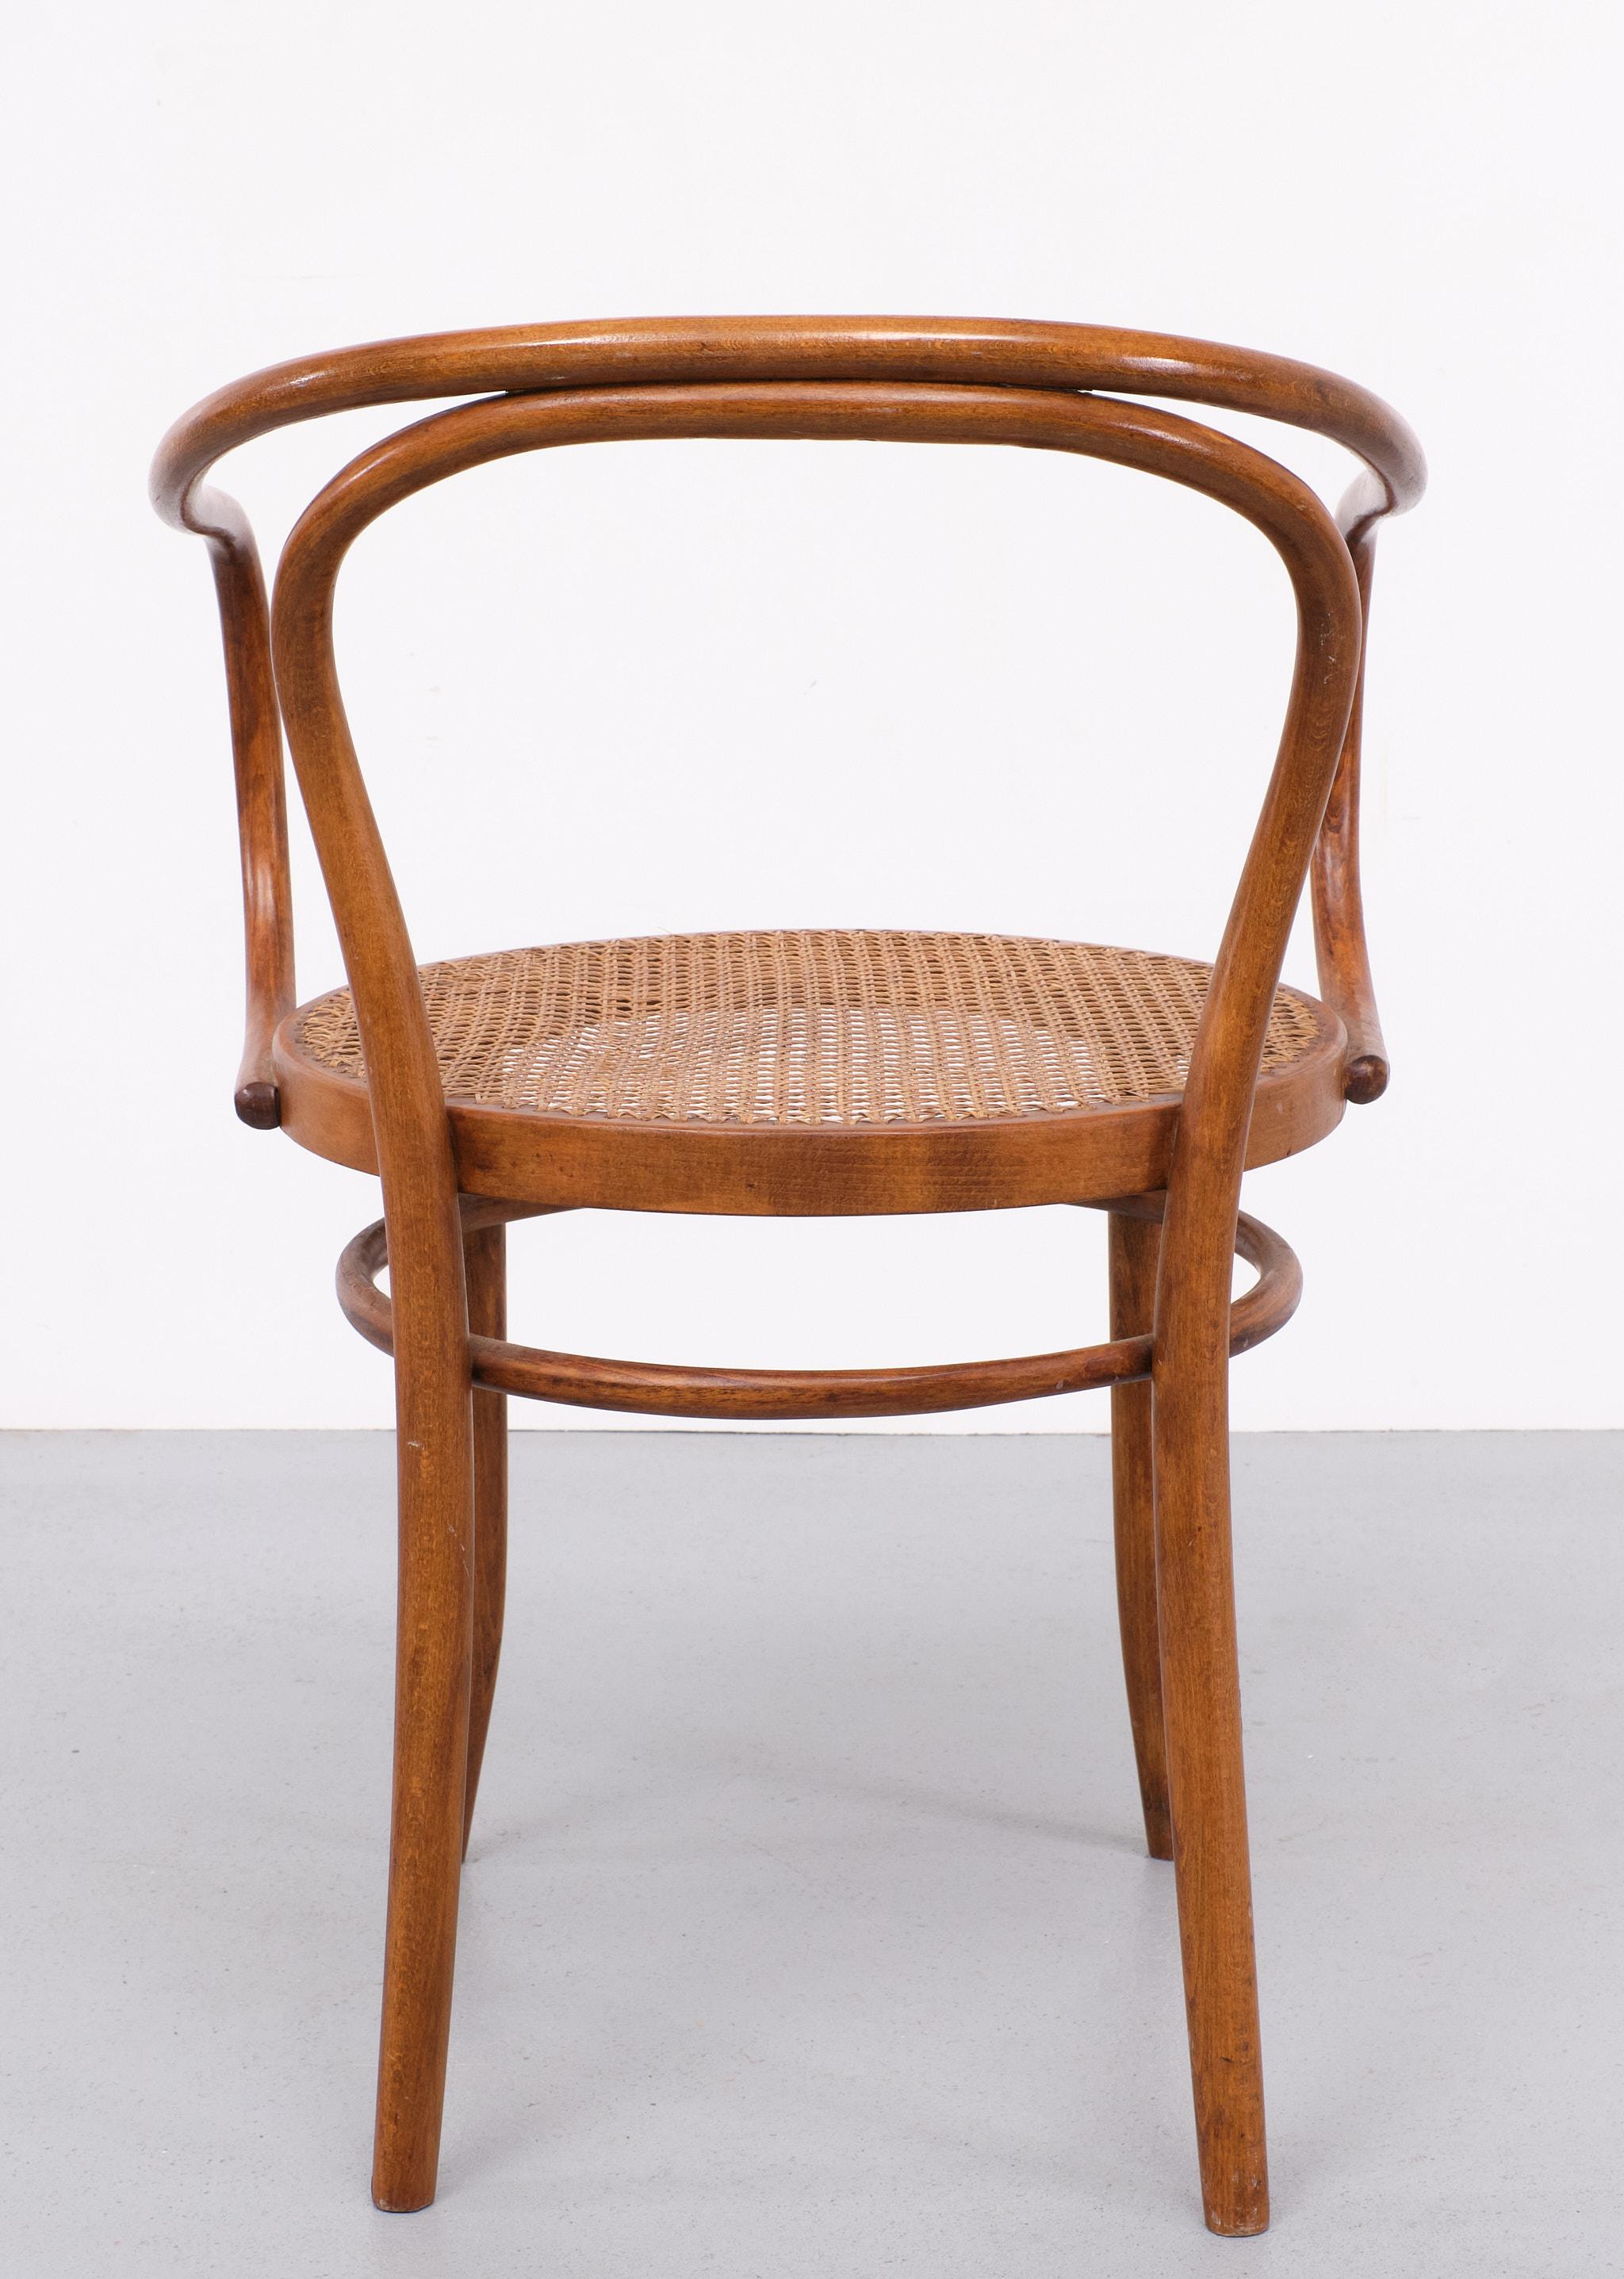 bentwood chairs second hand